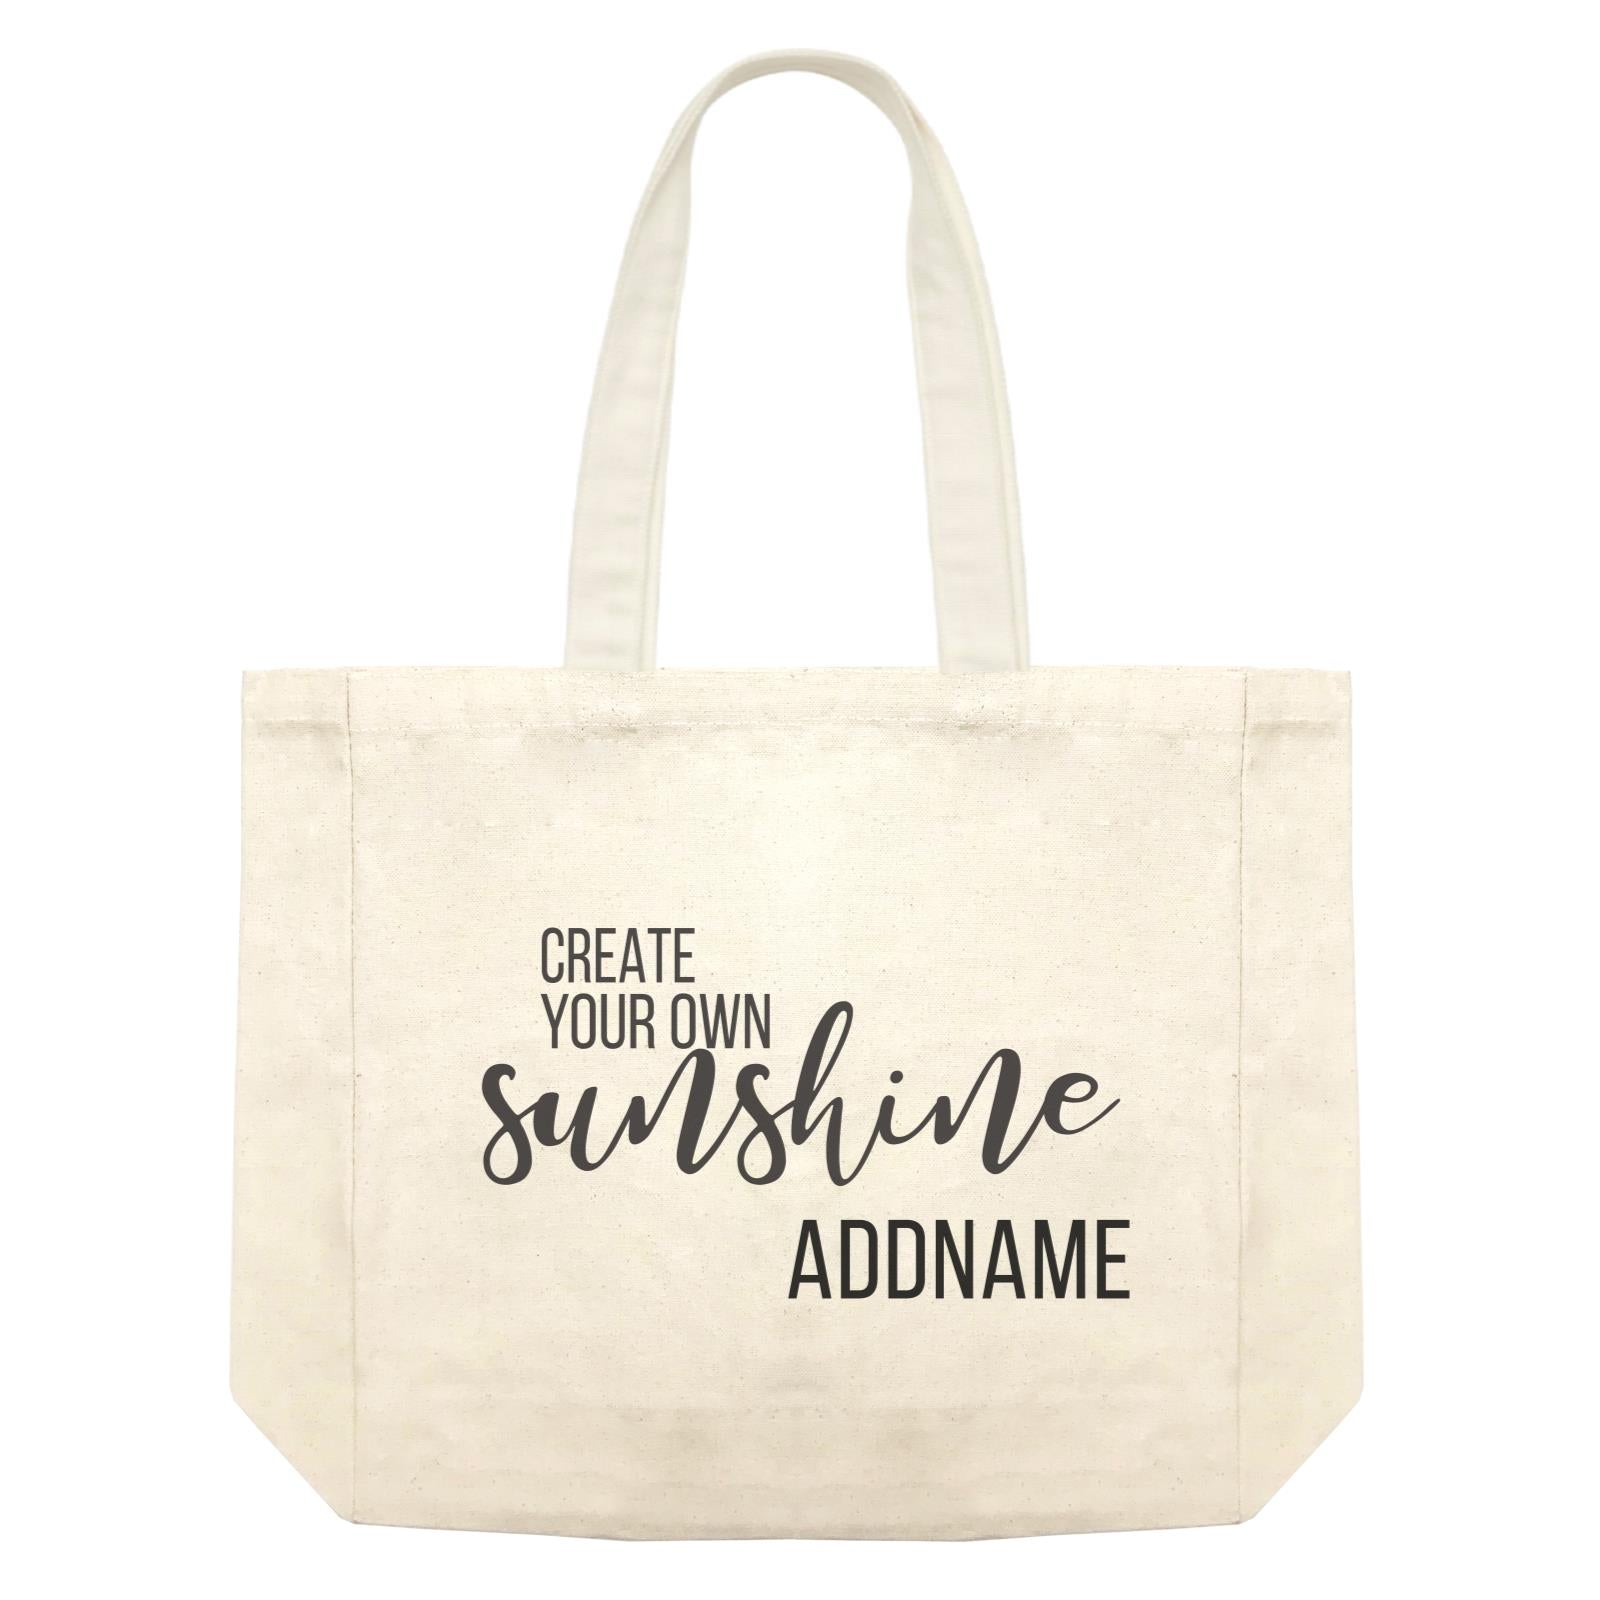 Inspiration Quotes Create Your Own Sunshine Addname Shopping Bag